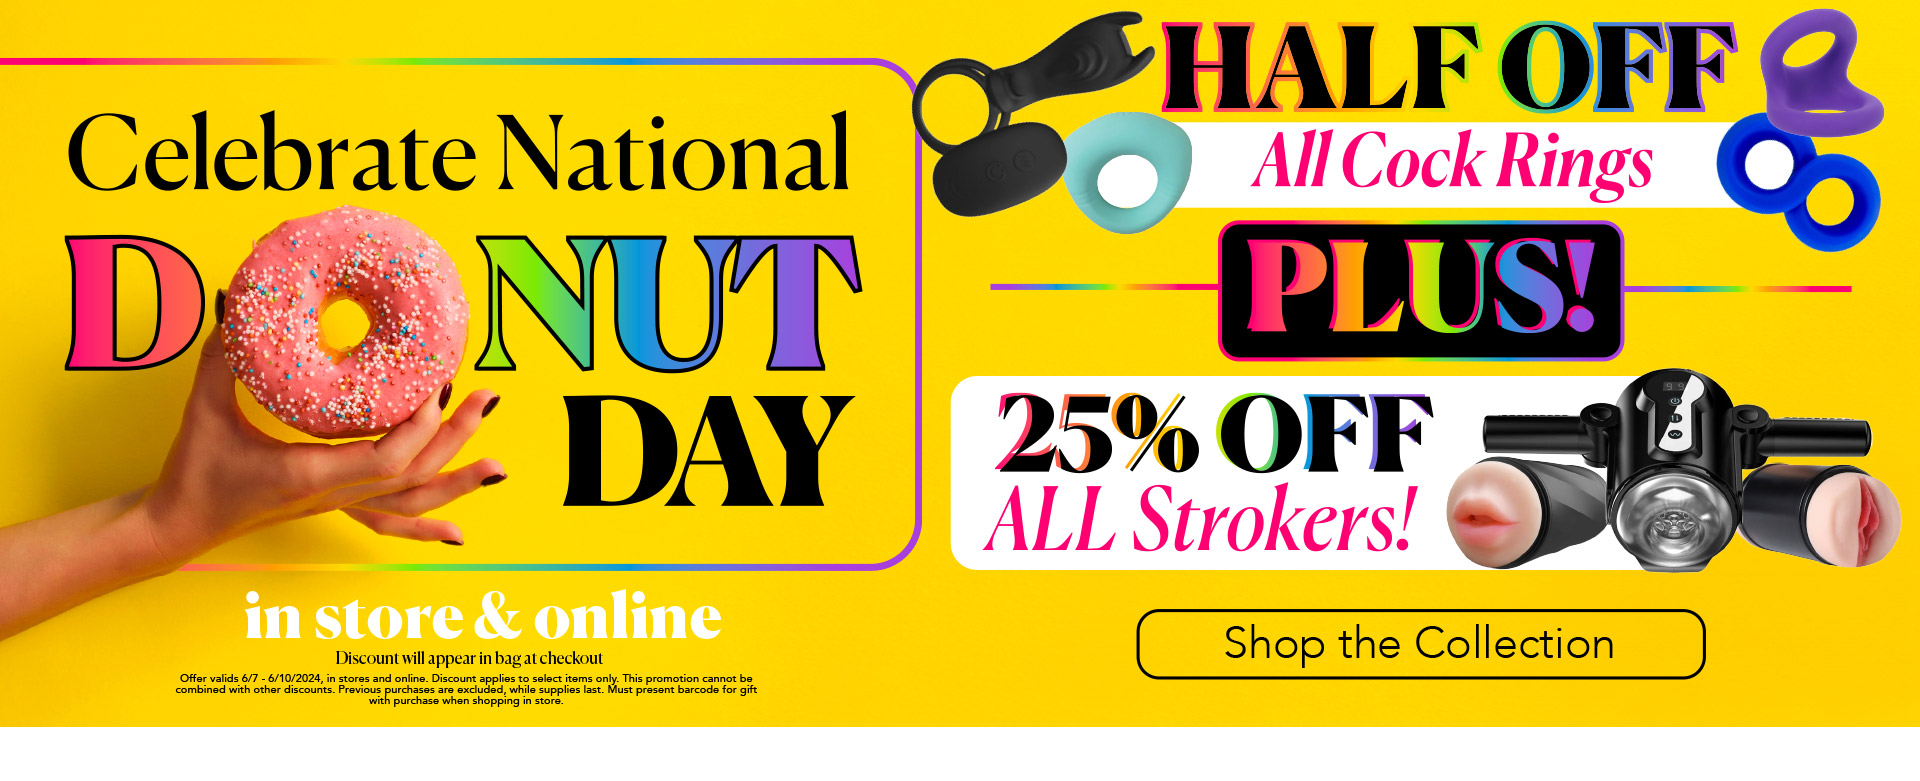 Celebrate National Donut Day - HALF OFF all cock rings and 25% off all Strokers - In store & online - While supplies last.